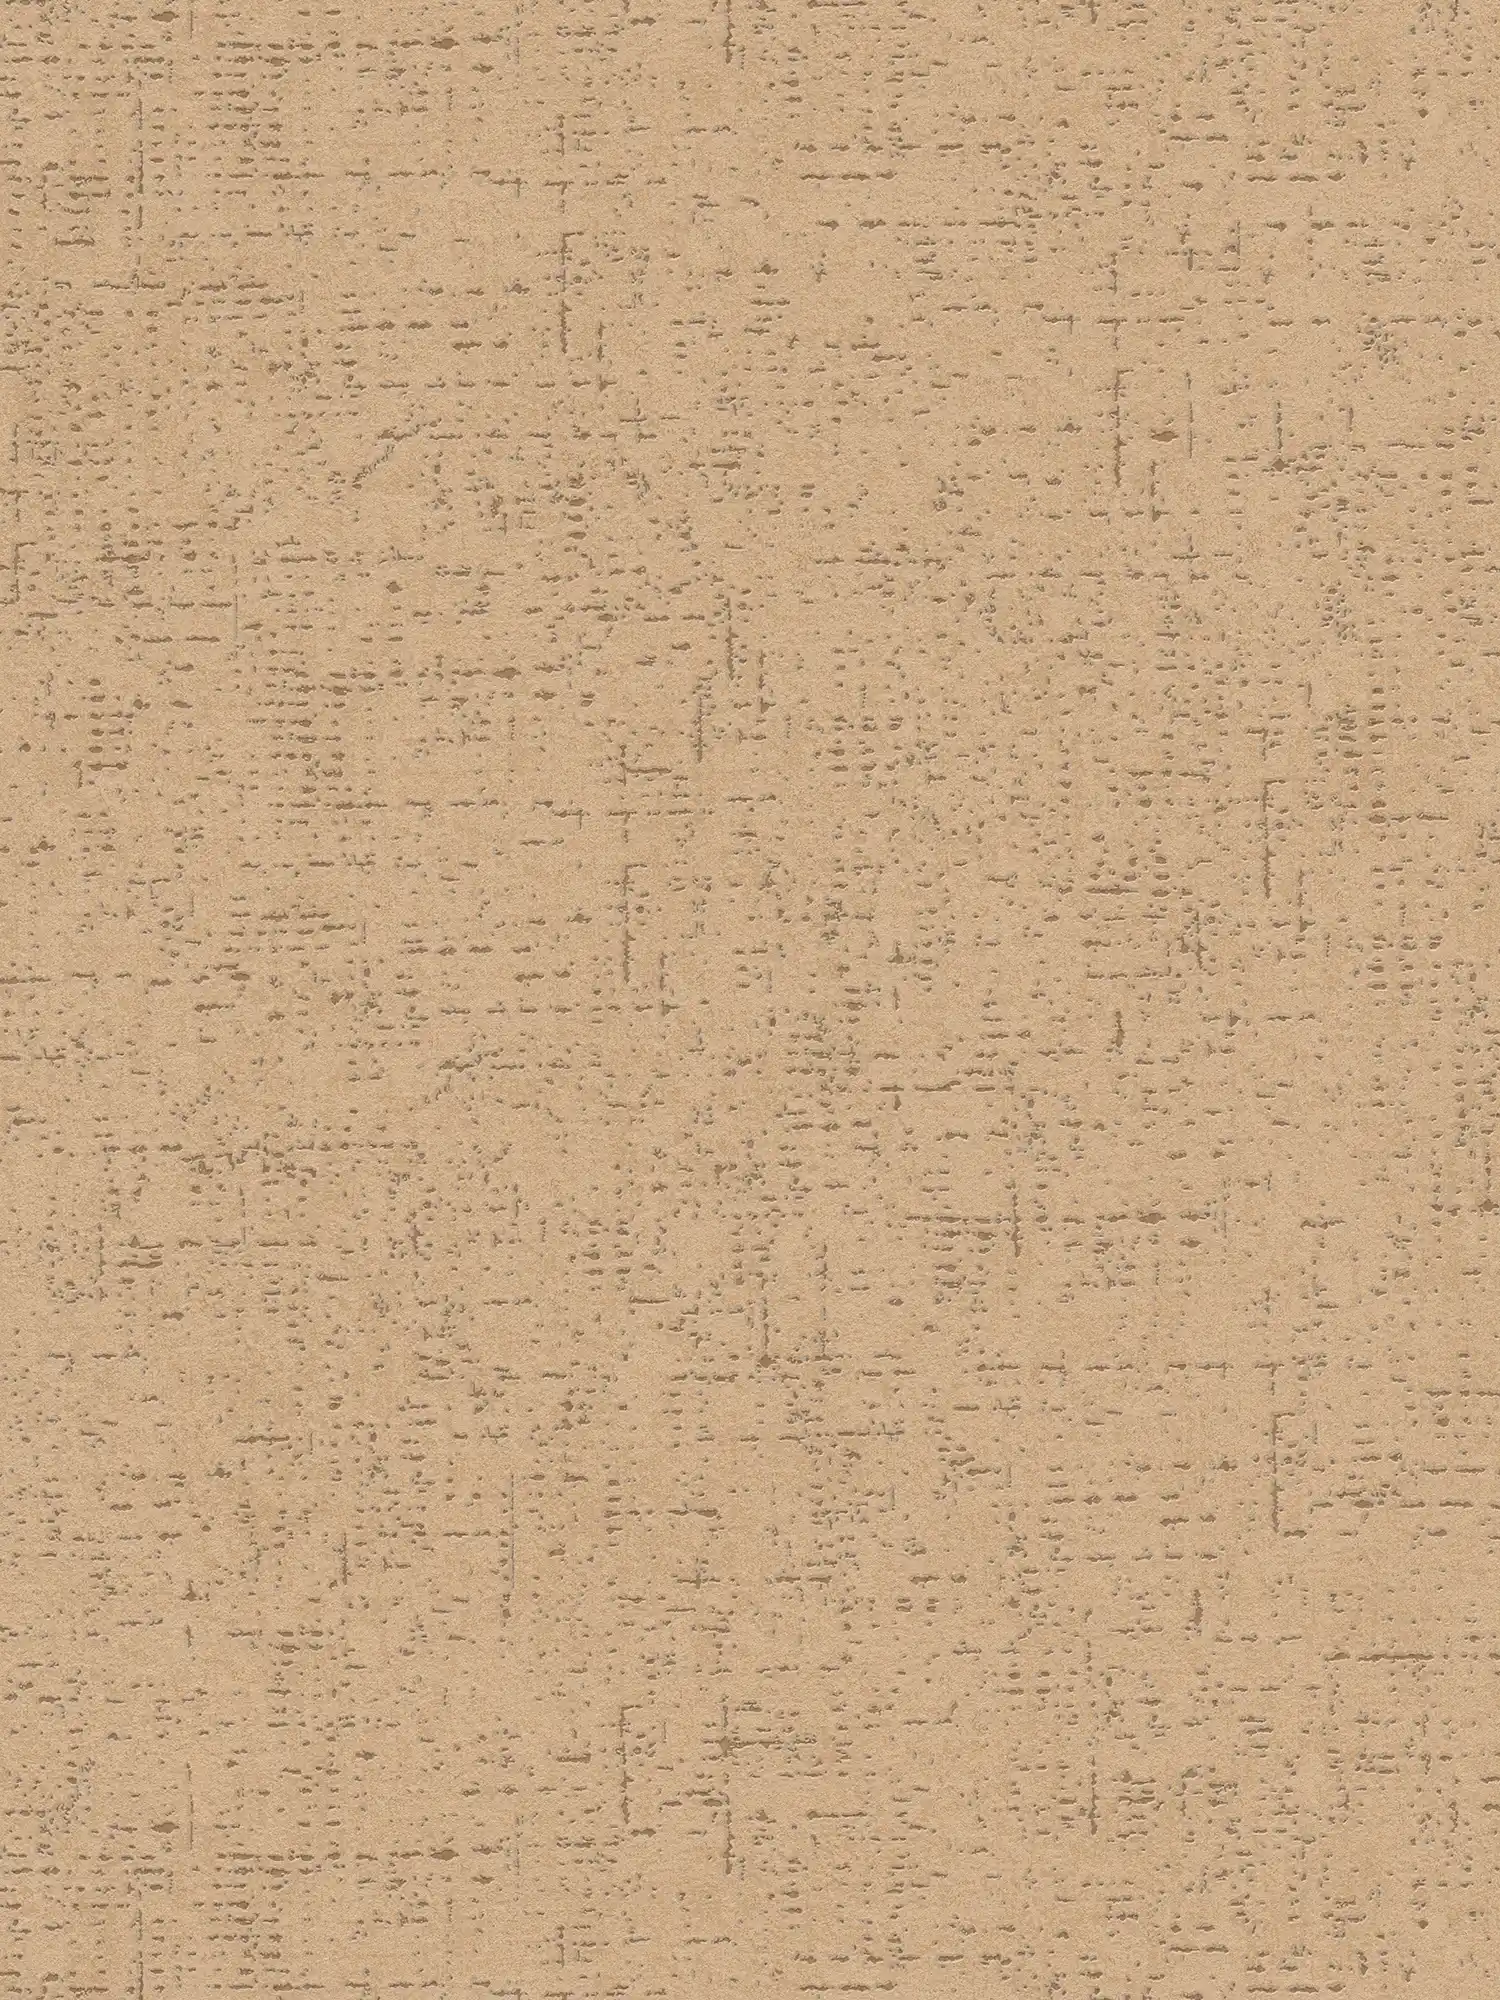 Rustic style crosshatched plain wallpaper - beige, brown
